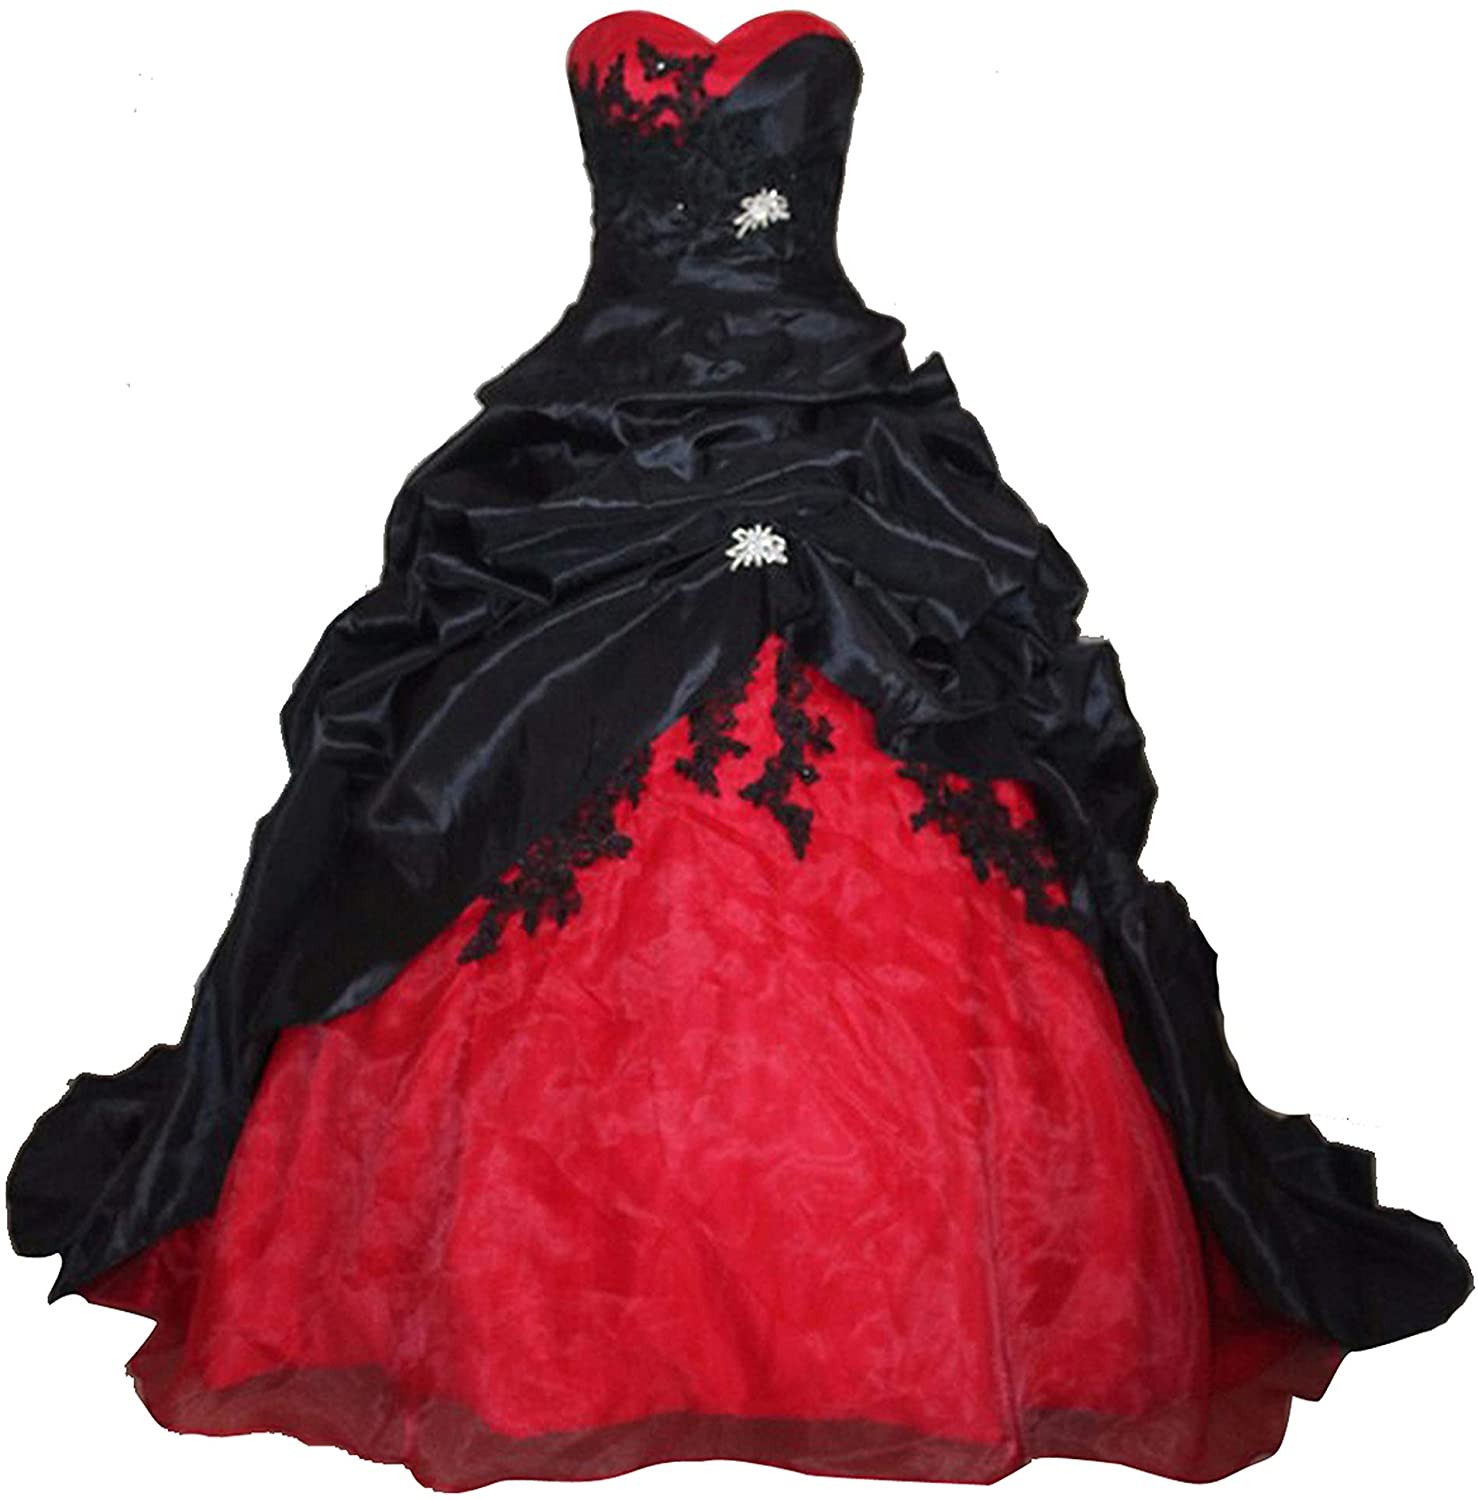 Babygirls Black Red and White Wedding Dress for Bride 2019 Sweetheart with  Train | eBay